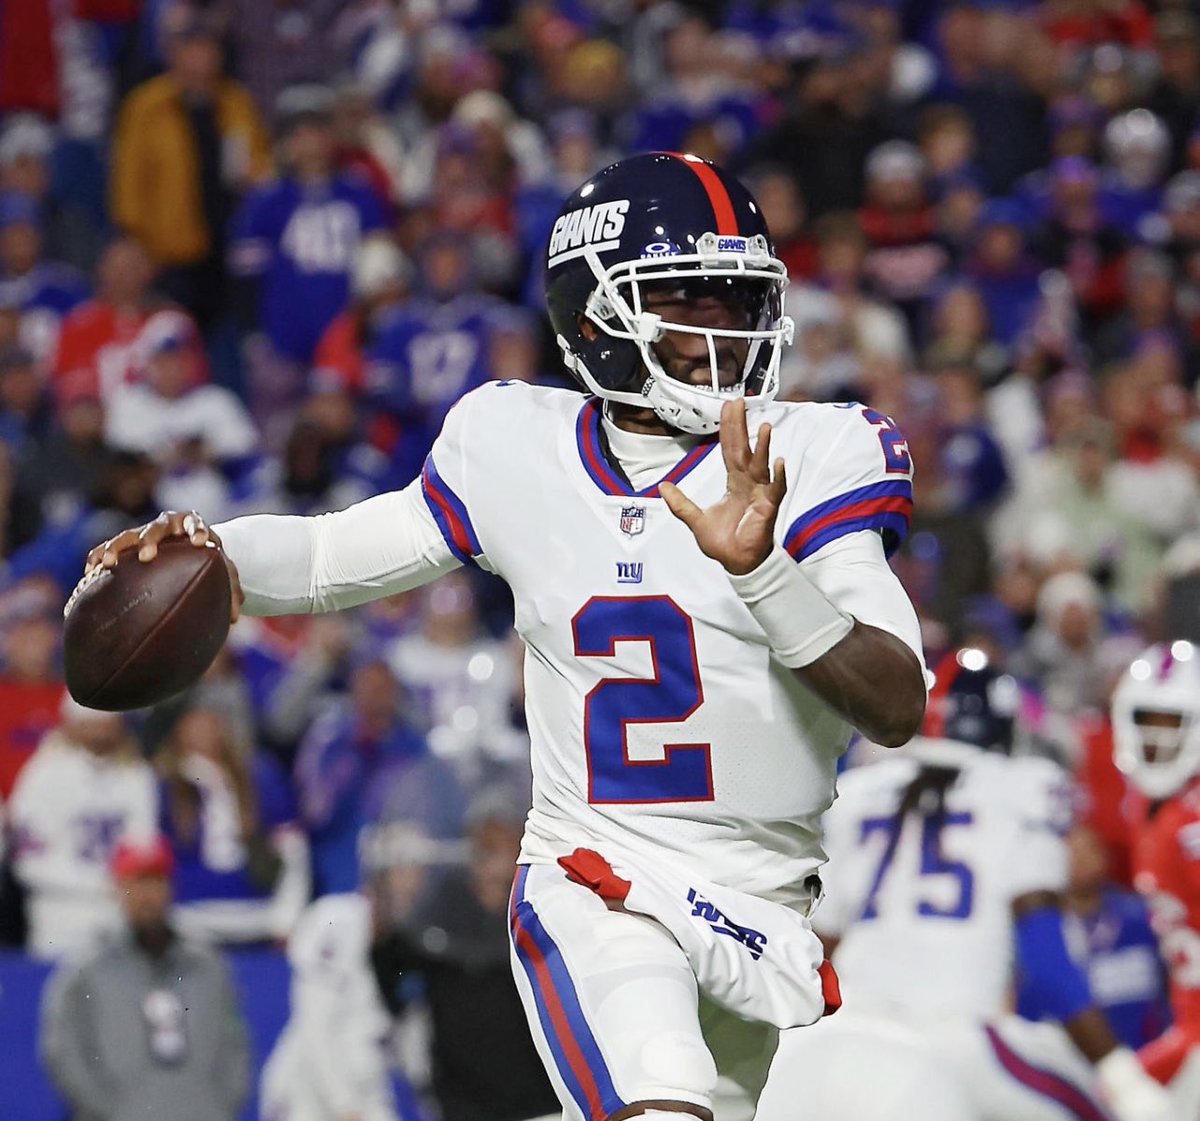 Final thoughts from the Giants 14-9 loss against the Bills: Tyrod Taylor had a heck of a game. Showed a ton of guts and heart. Pushed the ball down the field. If Daniel Jones neck is still an issue, Tyrod 100% deserves to start again next week. With that said; Tyrod shouldn’t…